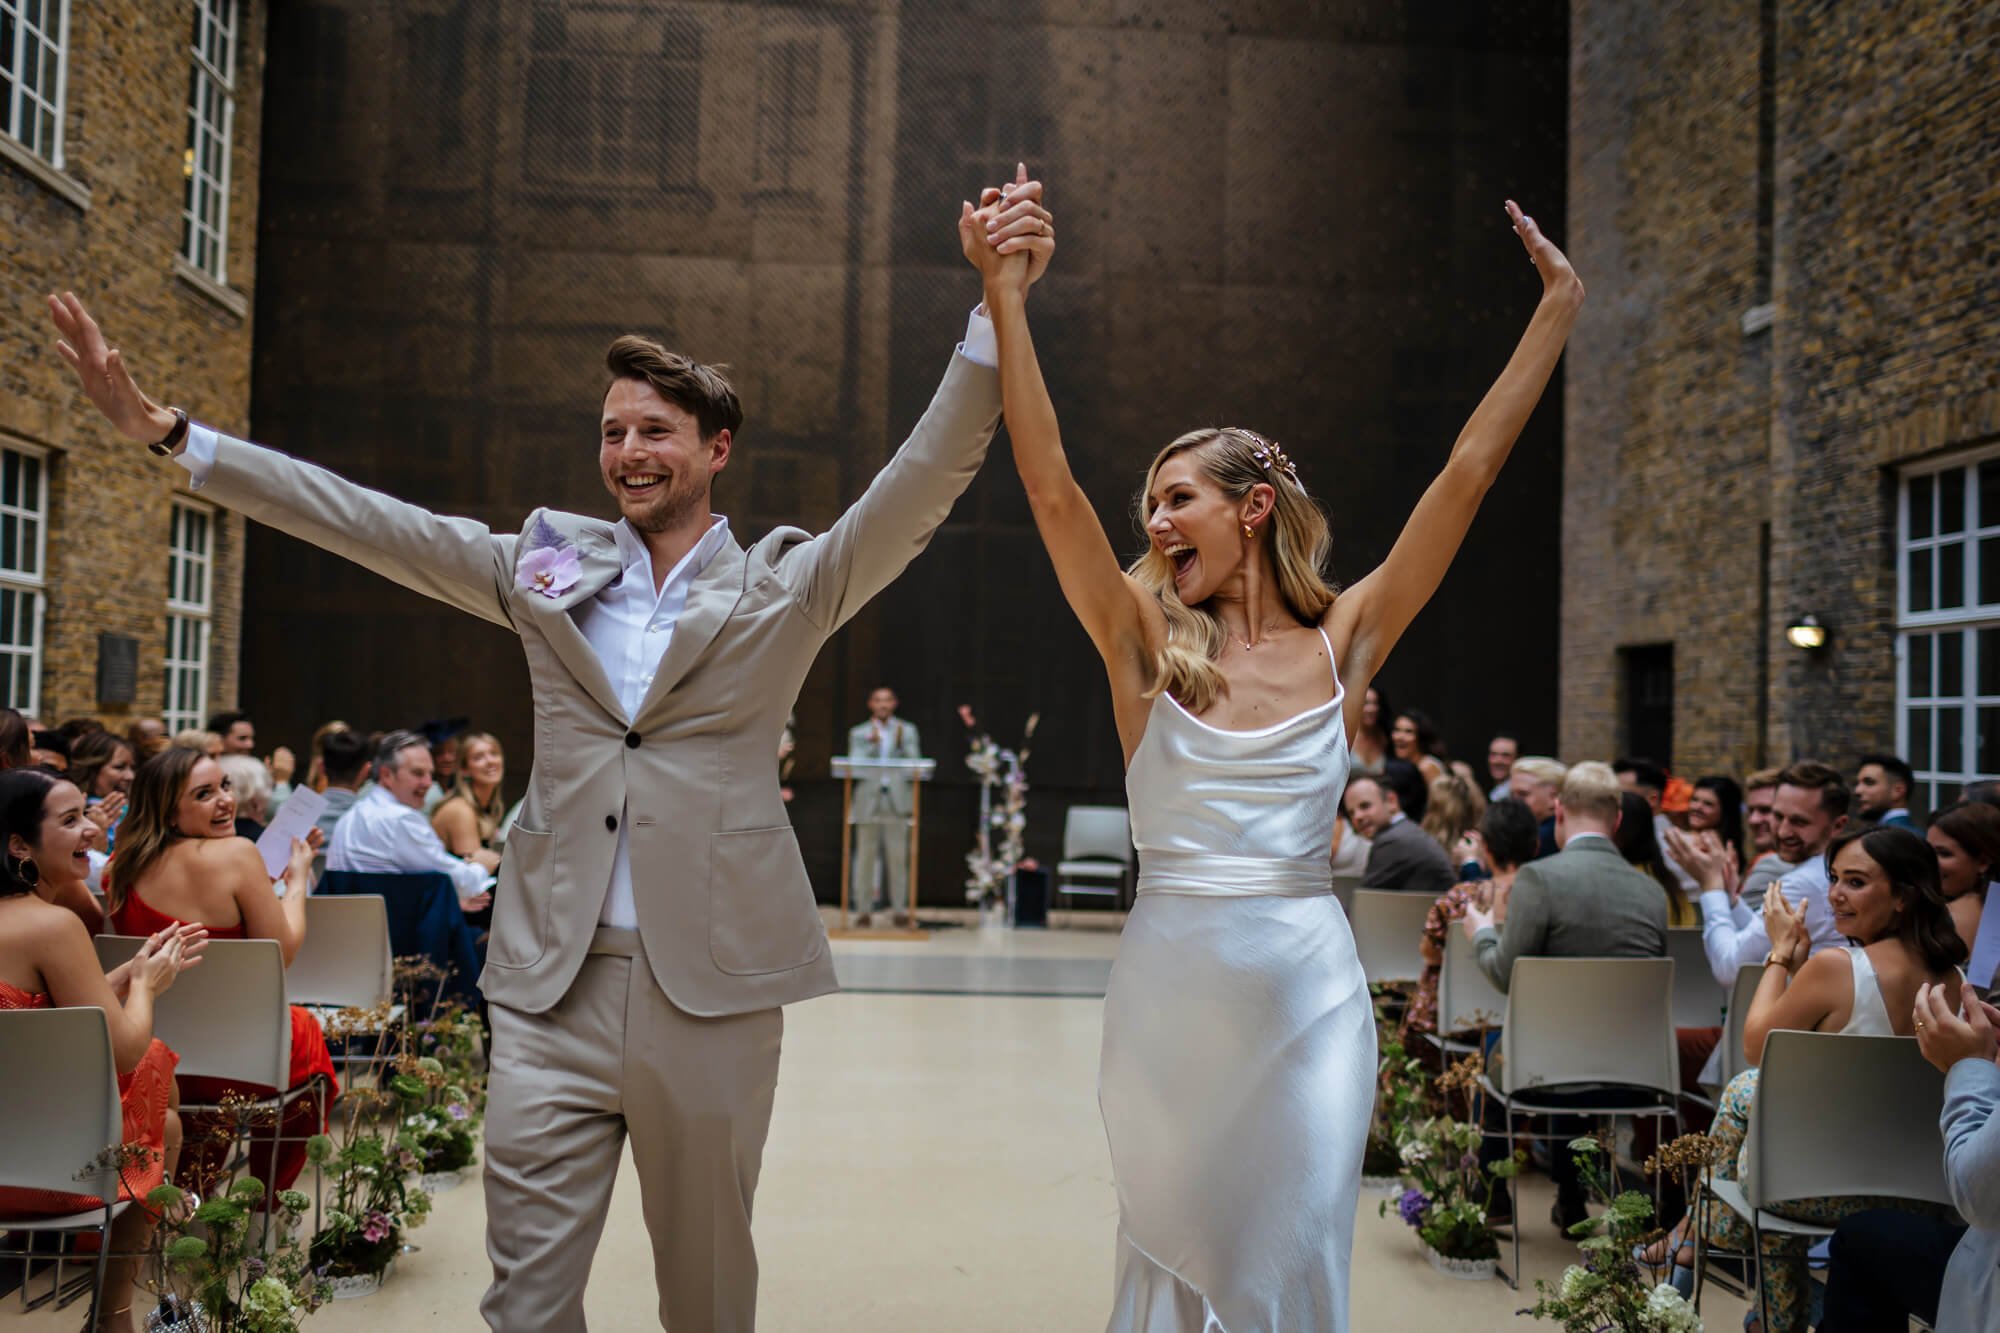 The bride and groom wave their hands in the air as they walk down the aisle